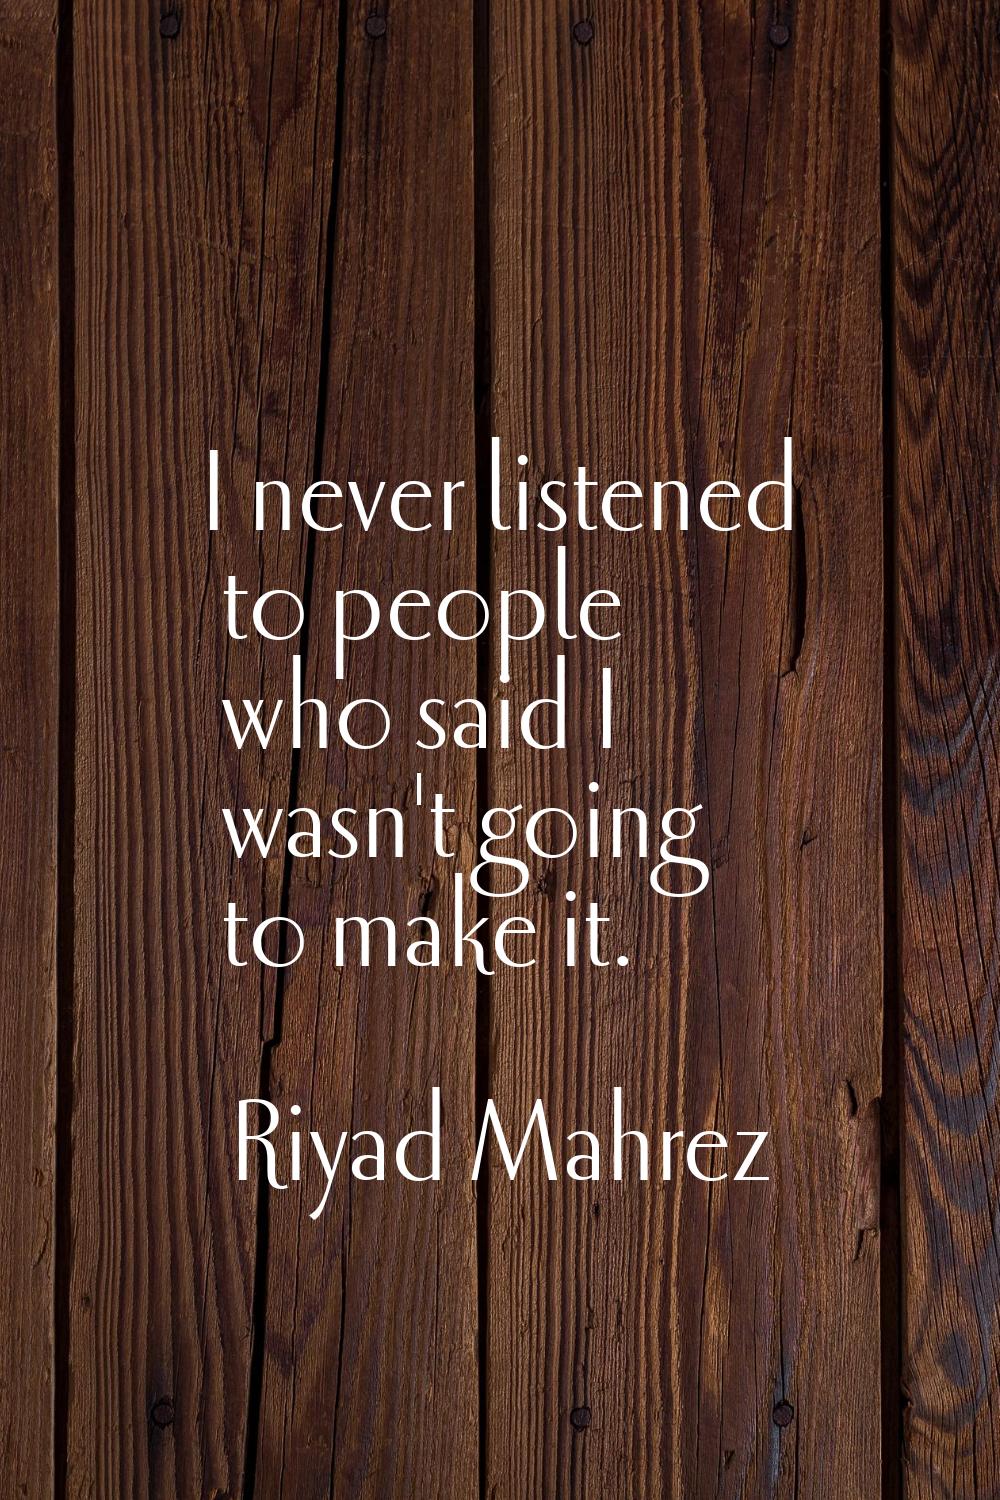 I never listened to people who said I wasn't going to make it.